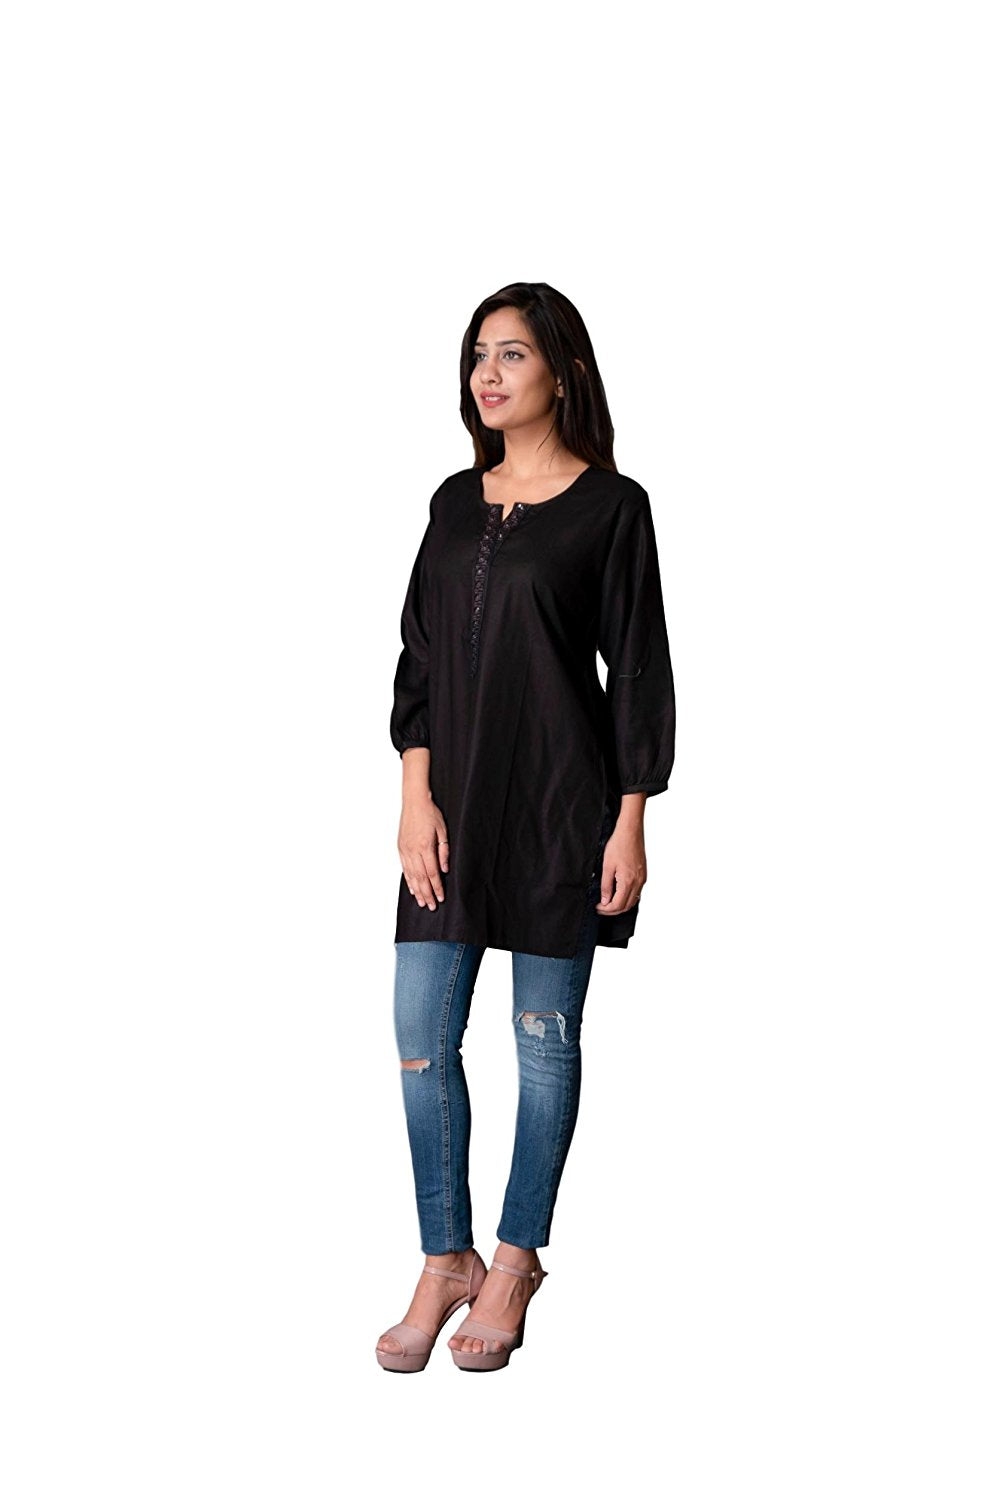 What is the best way to style jeans with kurta for tall Indian women? What  length of kurta is best preferred? - Quora